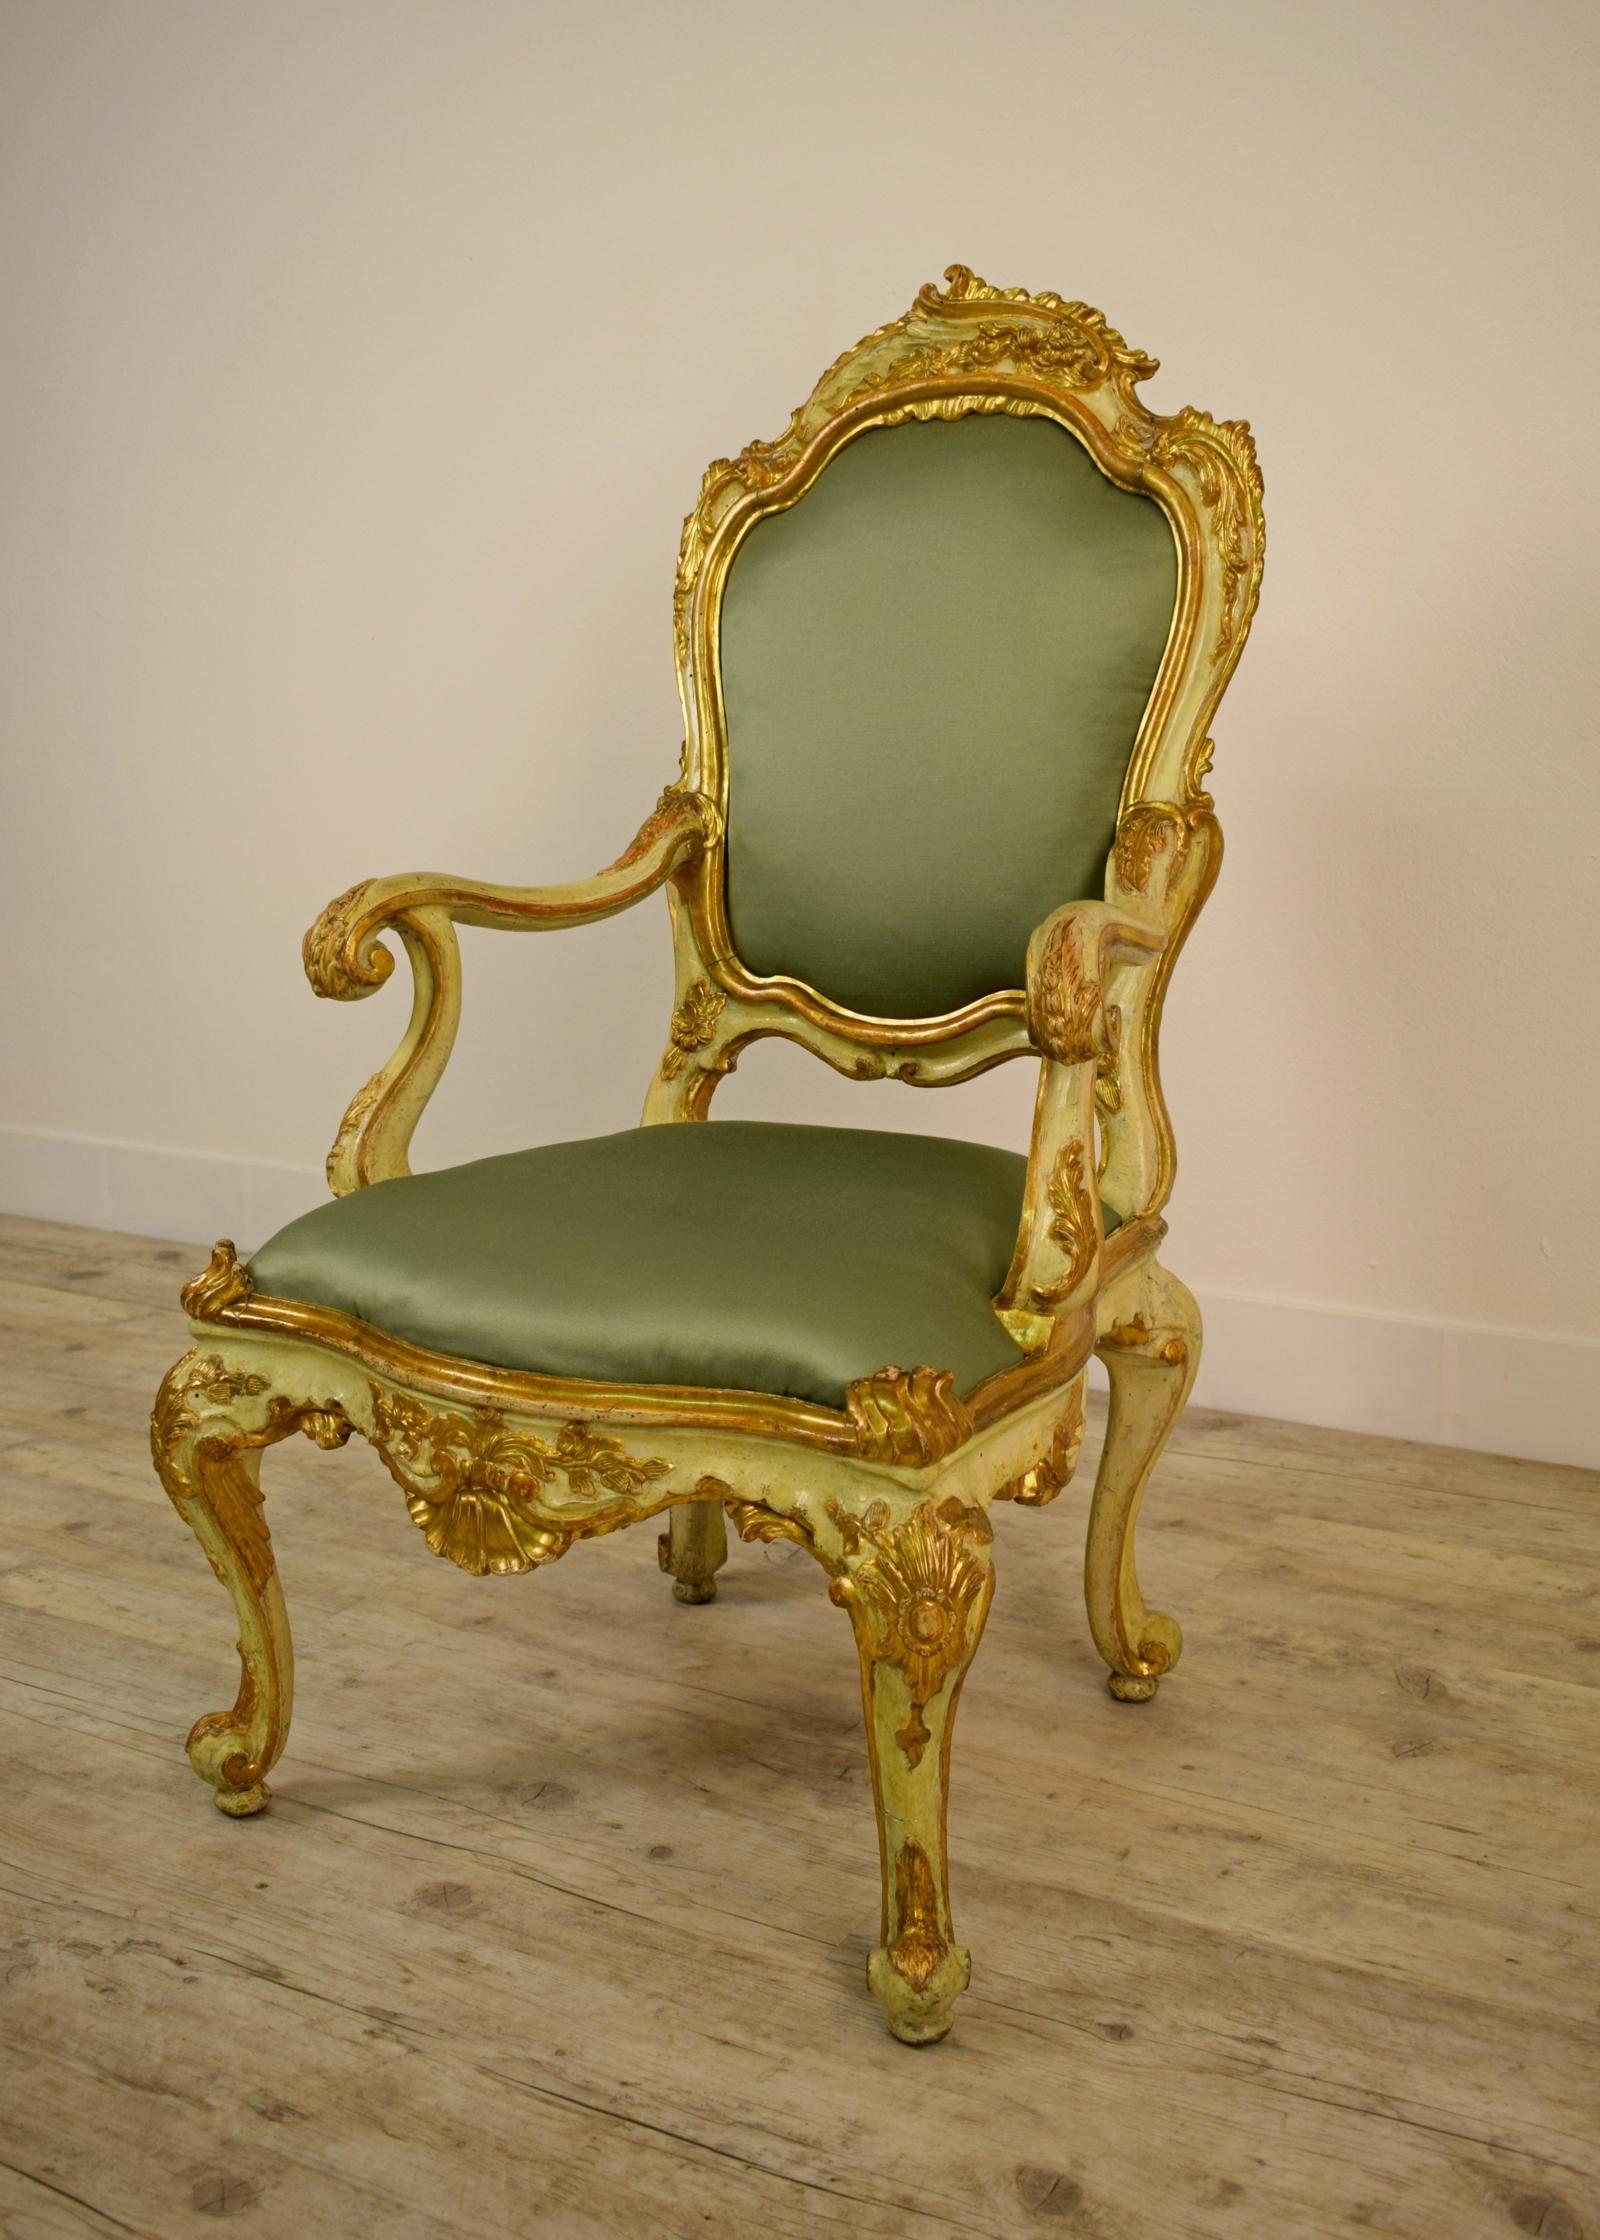 Italian 18th Century Venetian Lacquered and Gilded Wood Armchair